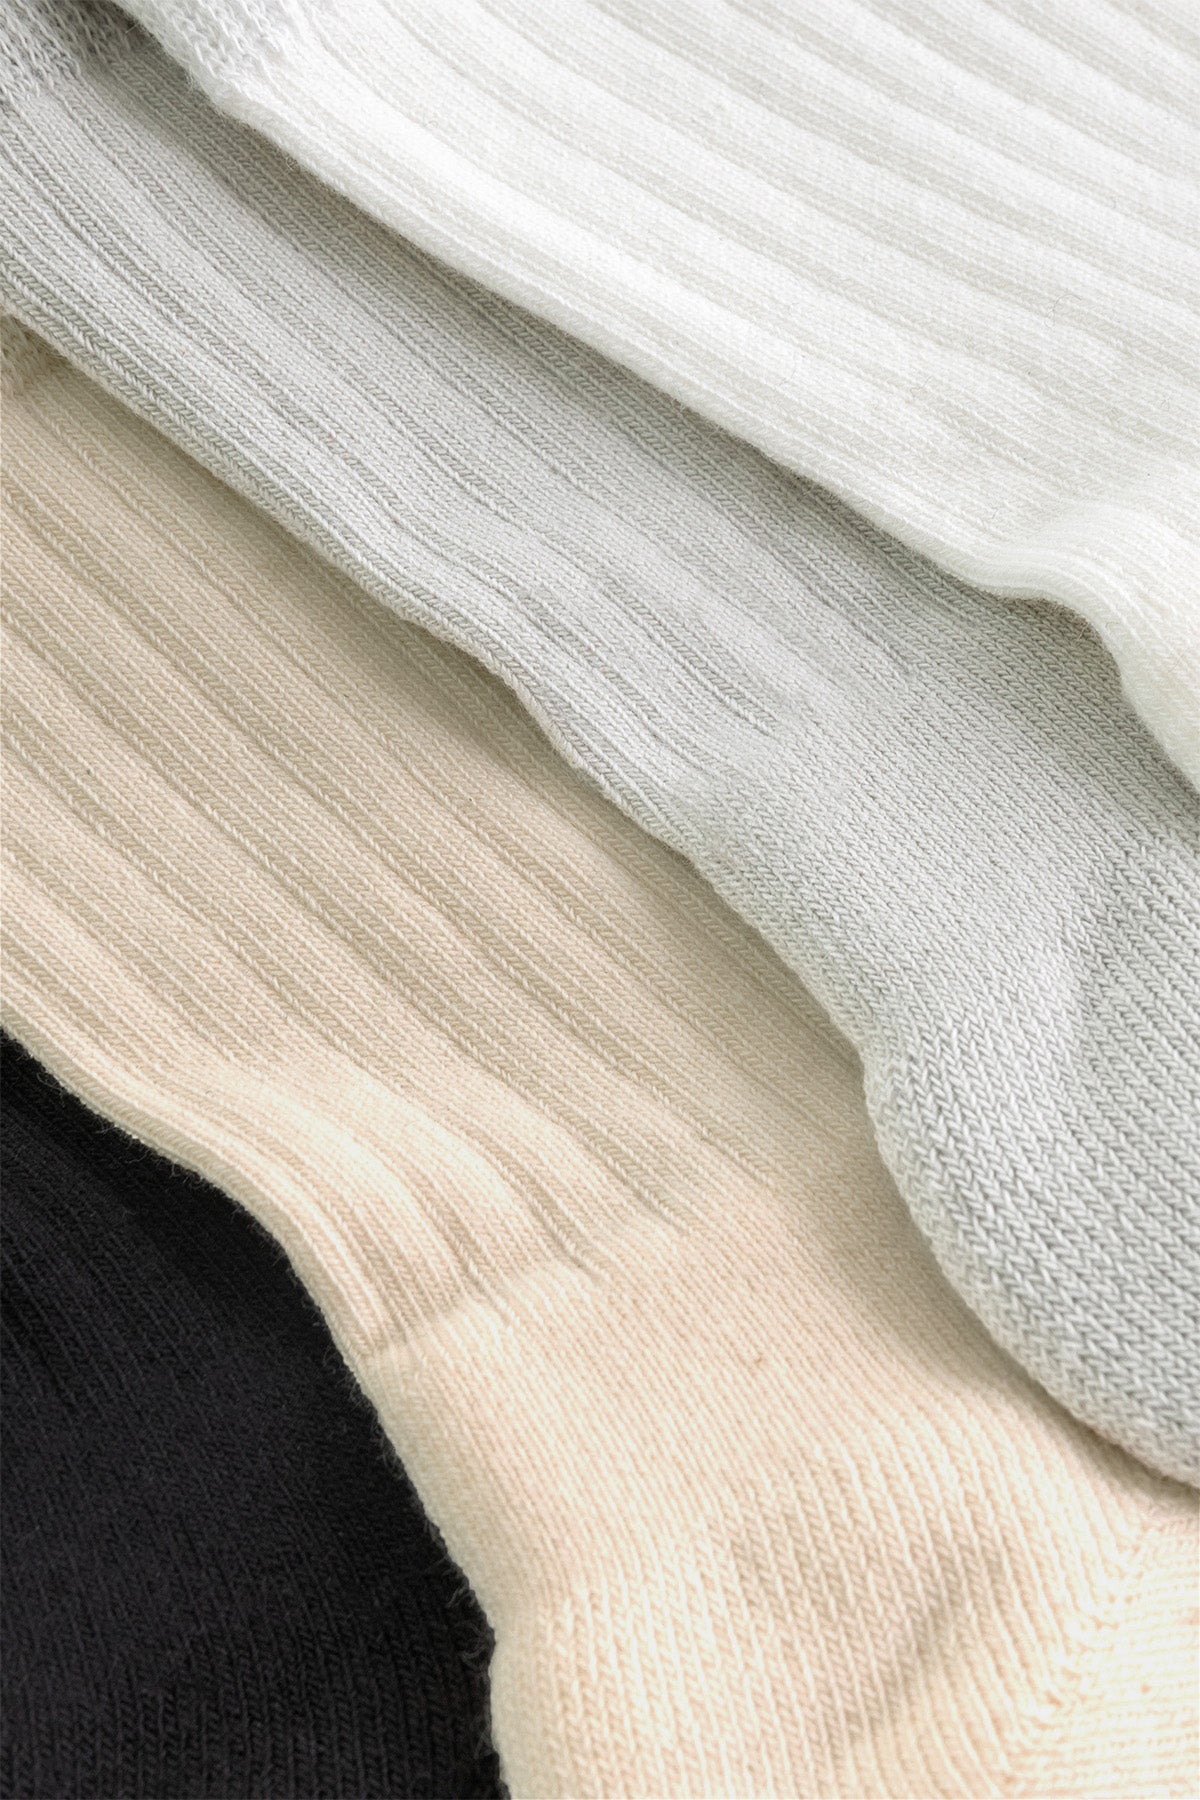 Ribbing detail, The Everyday Sock Set, Classic, GOTS certified Organic Cotton, by Comme Si